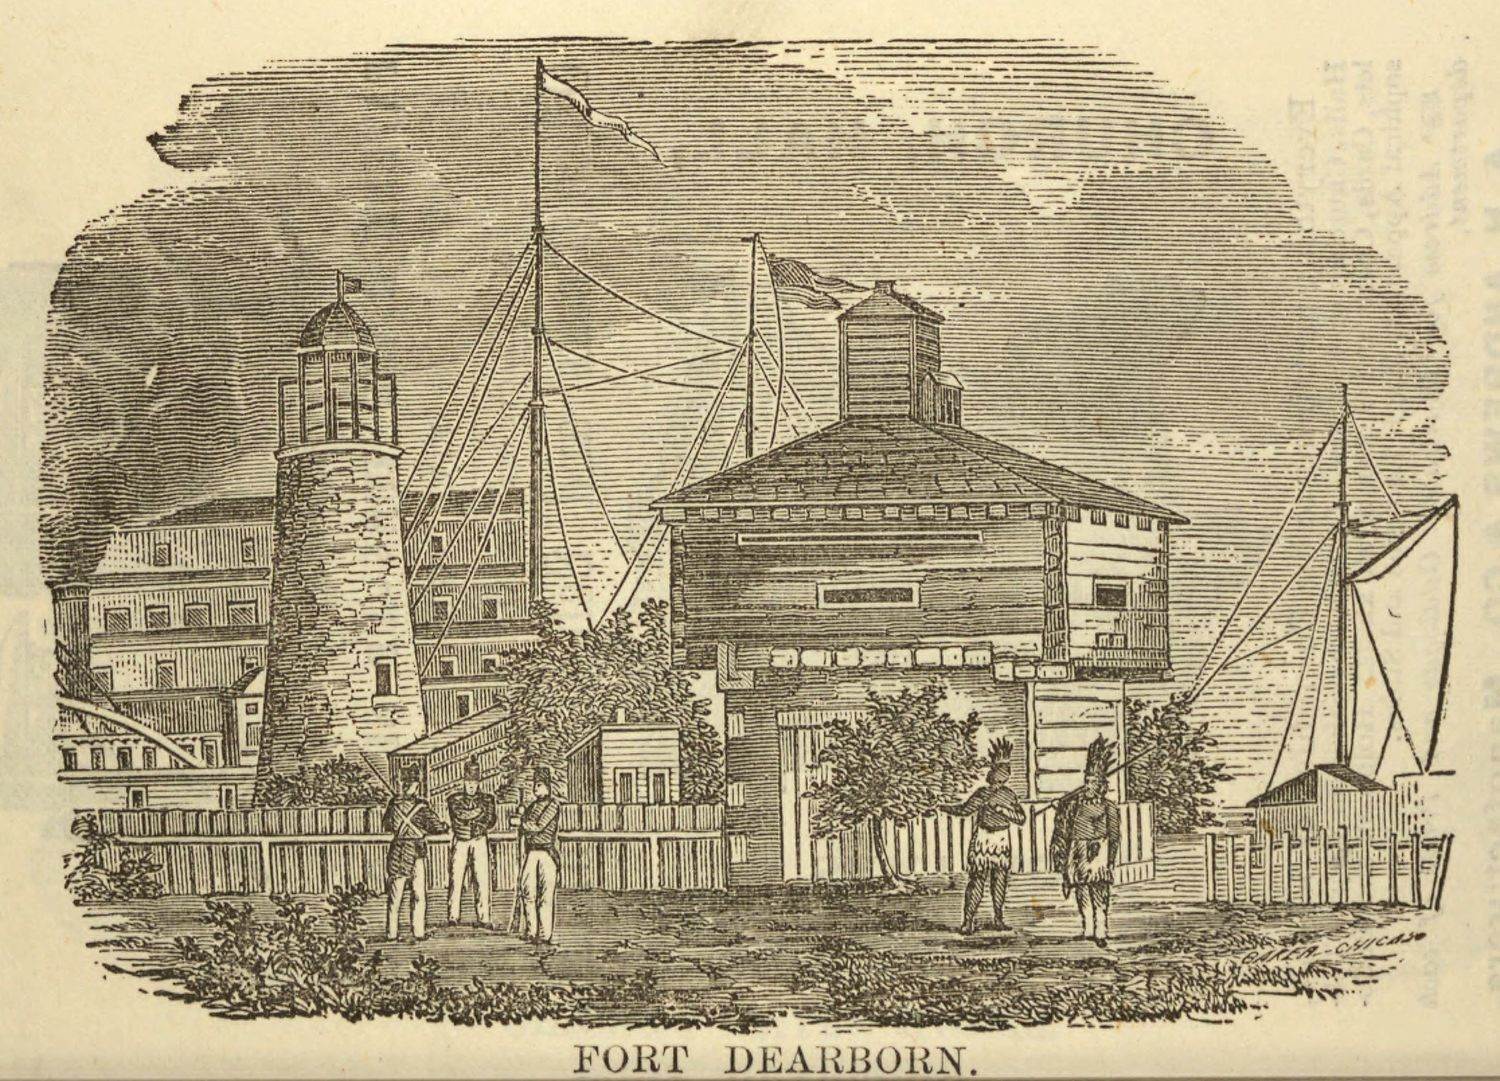 An 1869 depiction of the original Fort Dearborn.